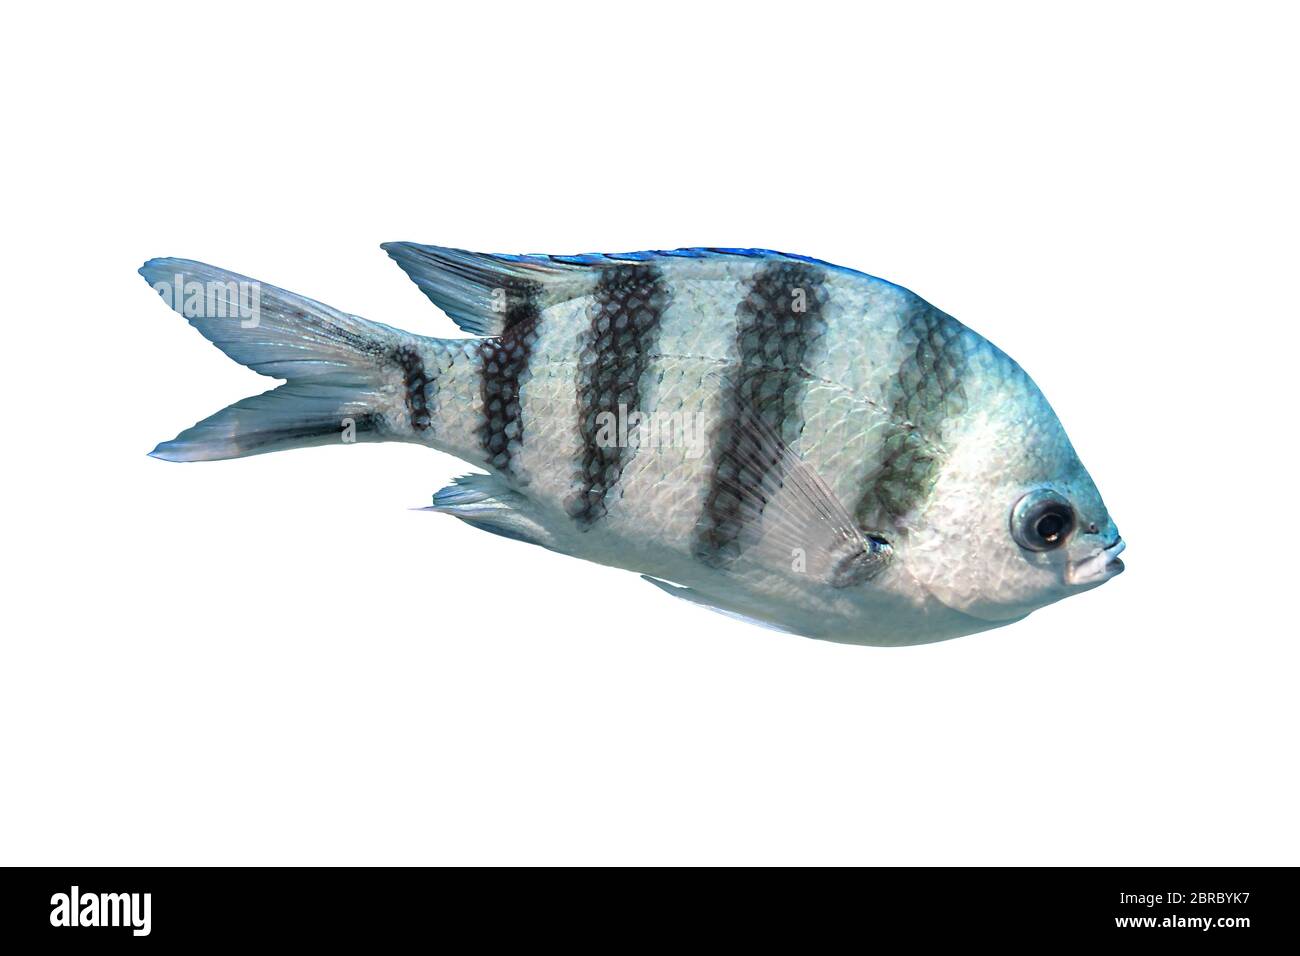 Scissortail Sergeant (Major, Pintano, Abudefduf) Isolated On White Background. Striped Indo-Pacific Tropical Fish. Saltwater Coralfish, Close Up, Side Stock Photo